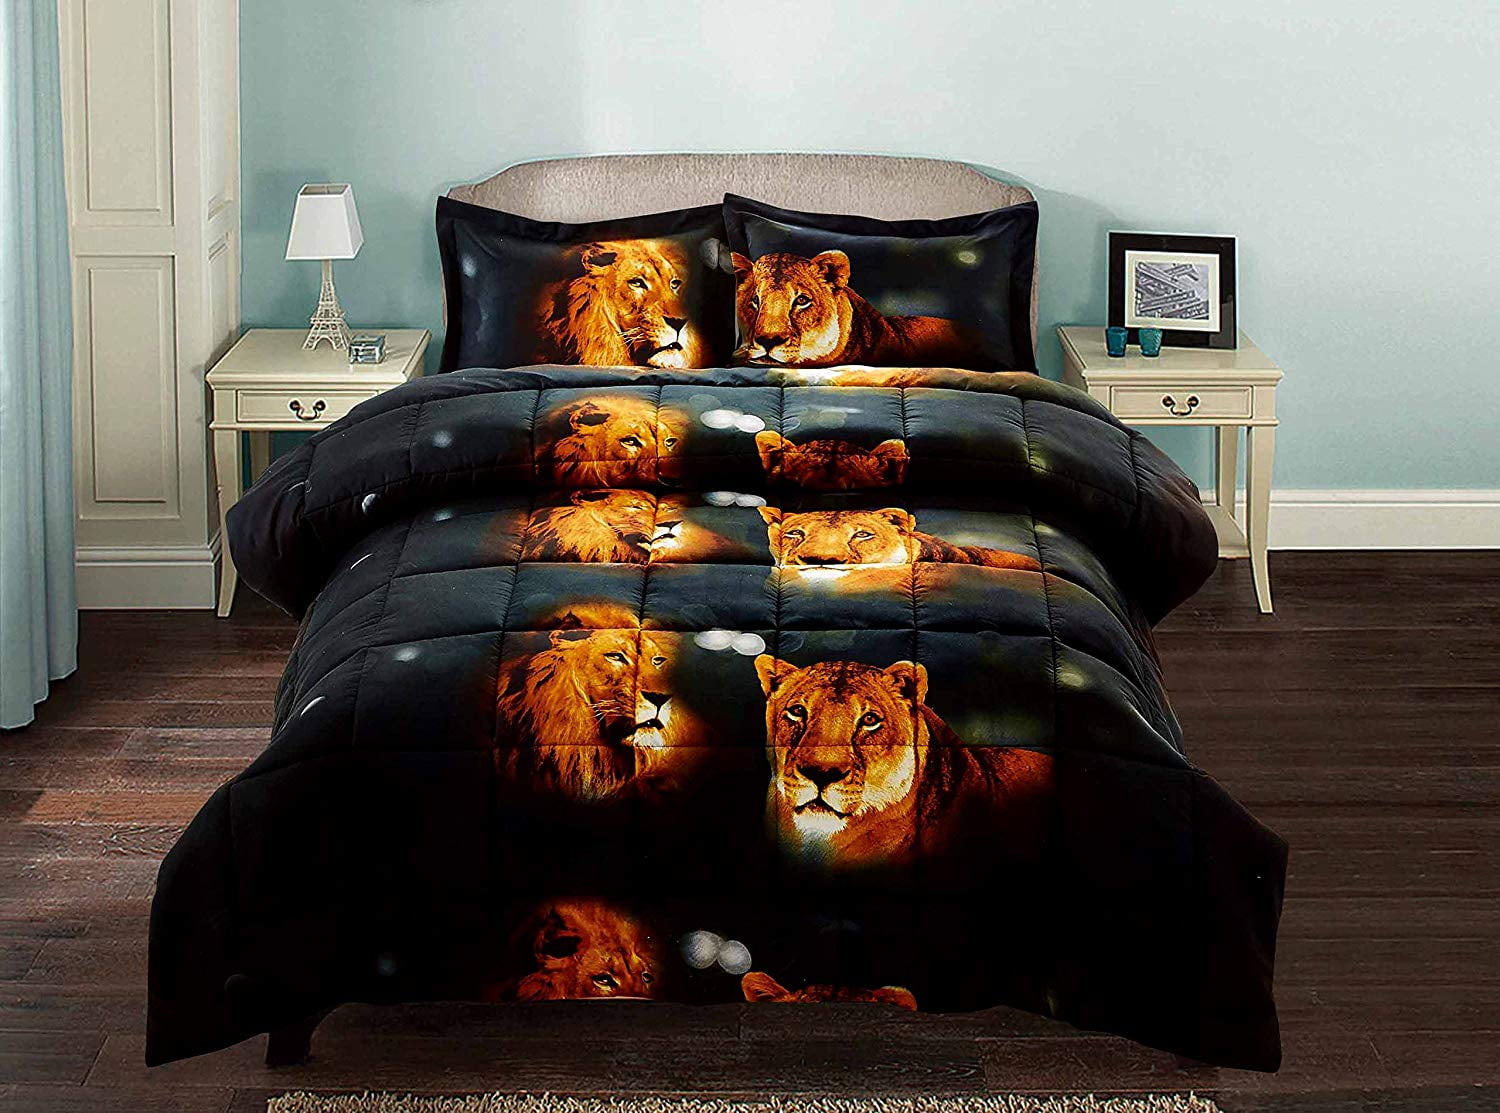 3 Piece 3d Comforter Set 3d Male And Female Lions Printed Comforter Set King Size Y15 Box Stitched Soft Breathable Hypoallergenic Fade Resistant 1pc 3d Print King Comforter 2pcs 3d